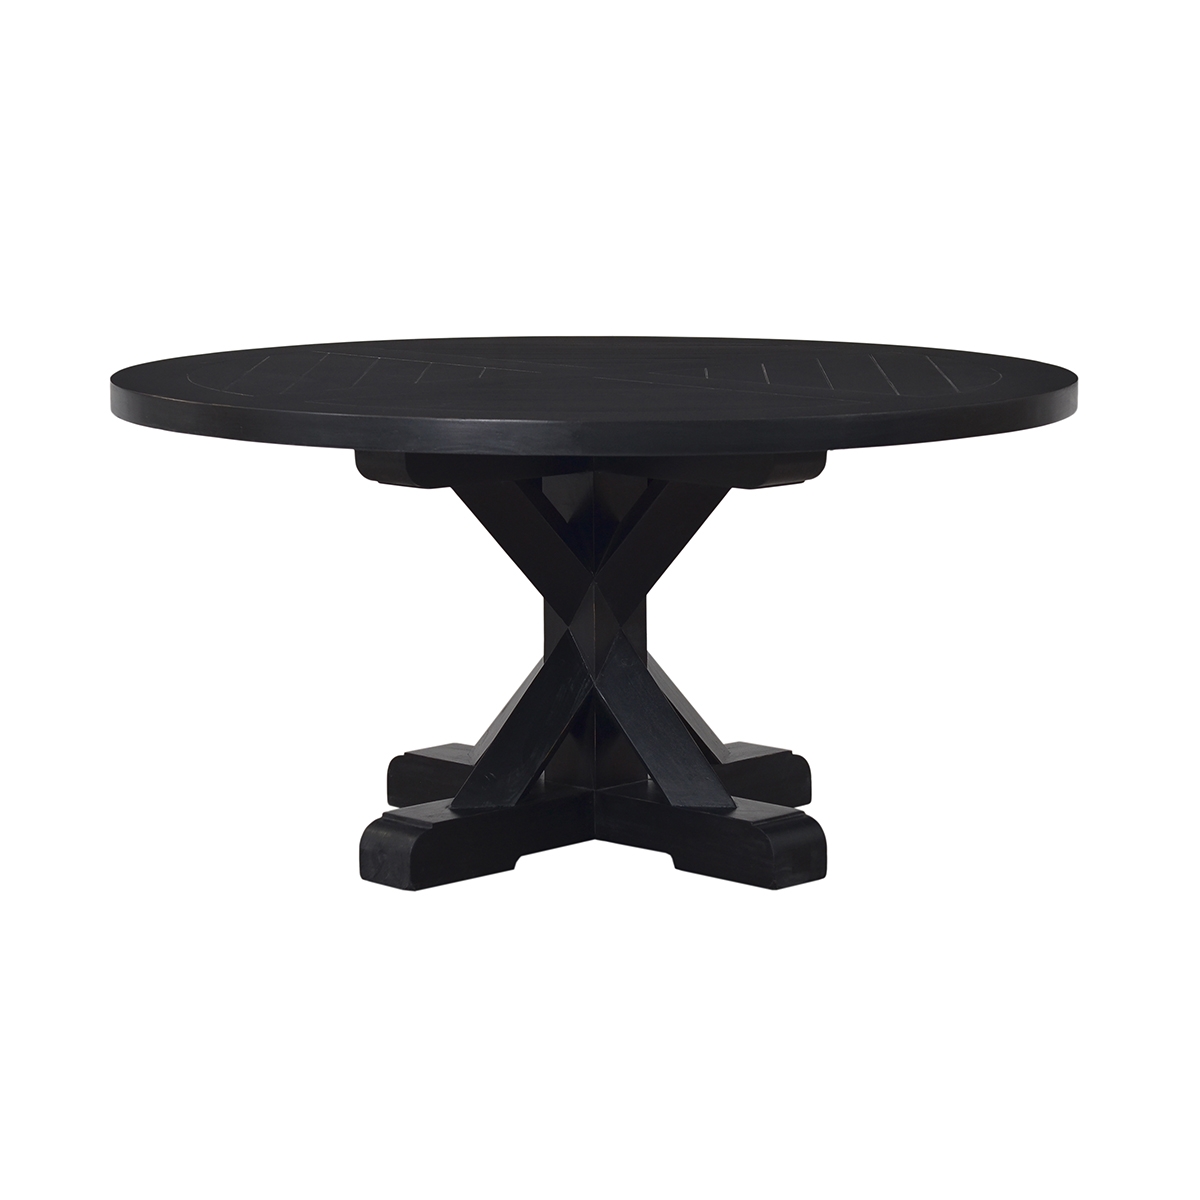 Bankside Trestle Round Dining Table 5'